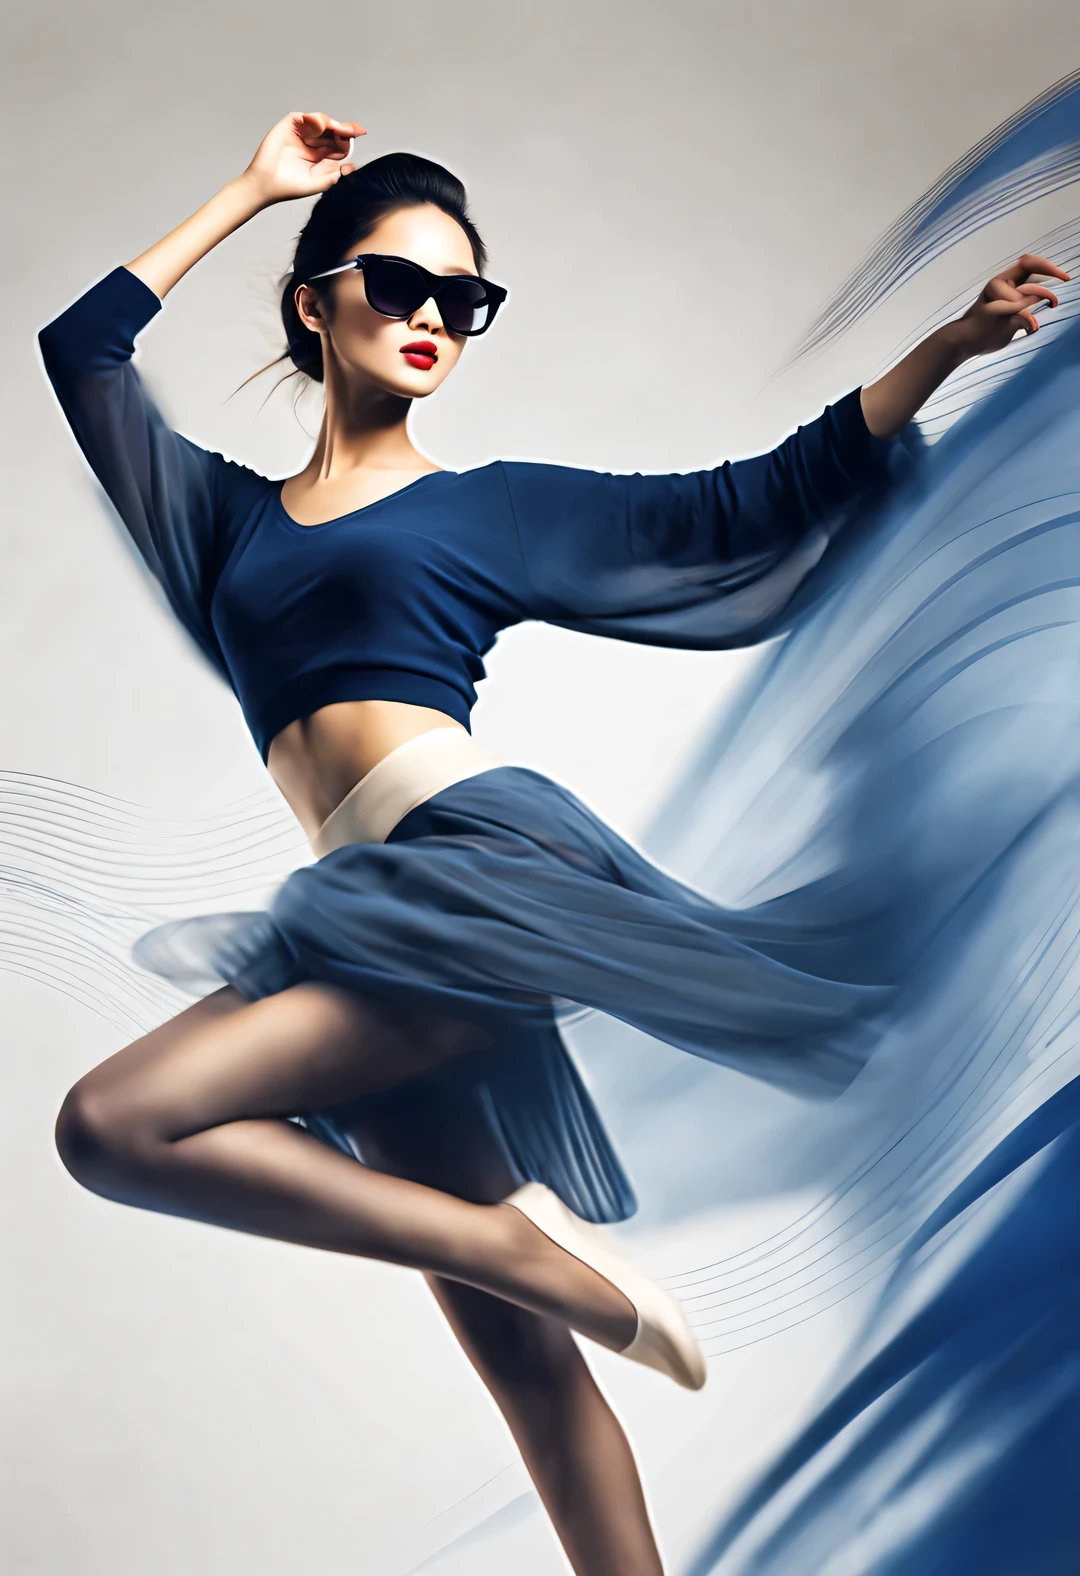 (Modern art dance poster design), (Half-length close-up), (Beautiful Chinese girl dancing in the air), (Wear modern fashionable winter fashion: 0.8), (Wearing large sunglasses: 1.2), Harmonious combination of classic and modern, An elegant combination of dark blue and brown，Highlight the retro charm without losing fashion sense. sweater, jeans, scarf, coat, Girl fair and flawless smooth skin, high nose bridge, and the posture of raising one’s head, sadness and beauty, slender figure, Exquisite facial features, Swirling mist, Noble temperament, illustration, ink painting, black hair, meatball head, messy, Proud, Surrealism, contemporary art photography, action painting illustration, abstract expressionism, Pixar, depth of field, motion blur, backlight, Falling shadows, gradually blurred, Elevation viewing angle, Sony FE General Manager, ultra high definition, masterpiece, Accuracy, textured skin, Super details, high detail, high quality, Award-winning, best quality, Level, 16k, Photographed from a bottom-up perspective,